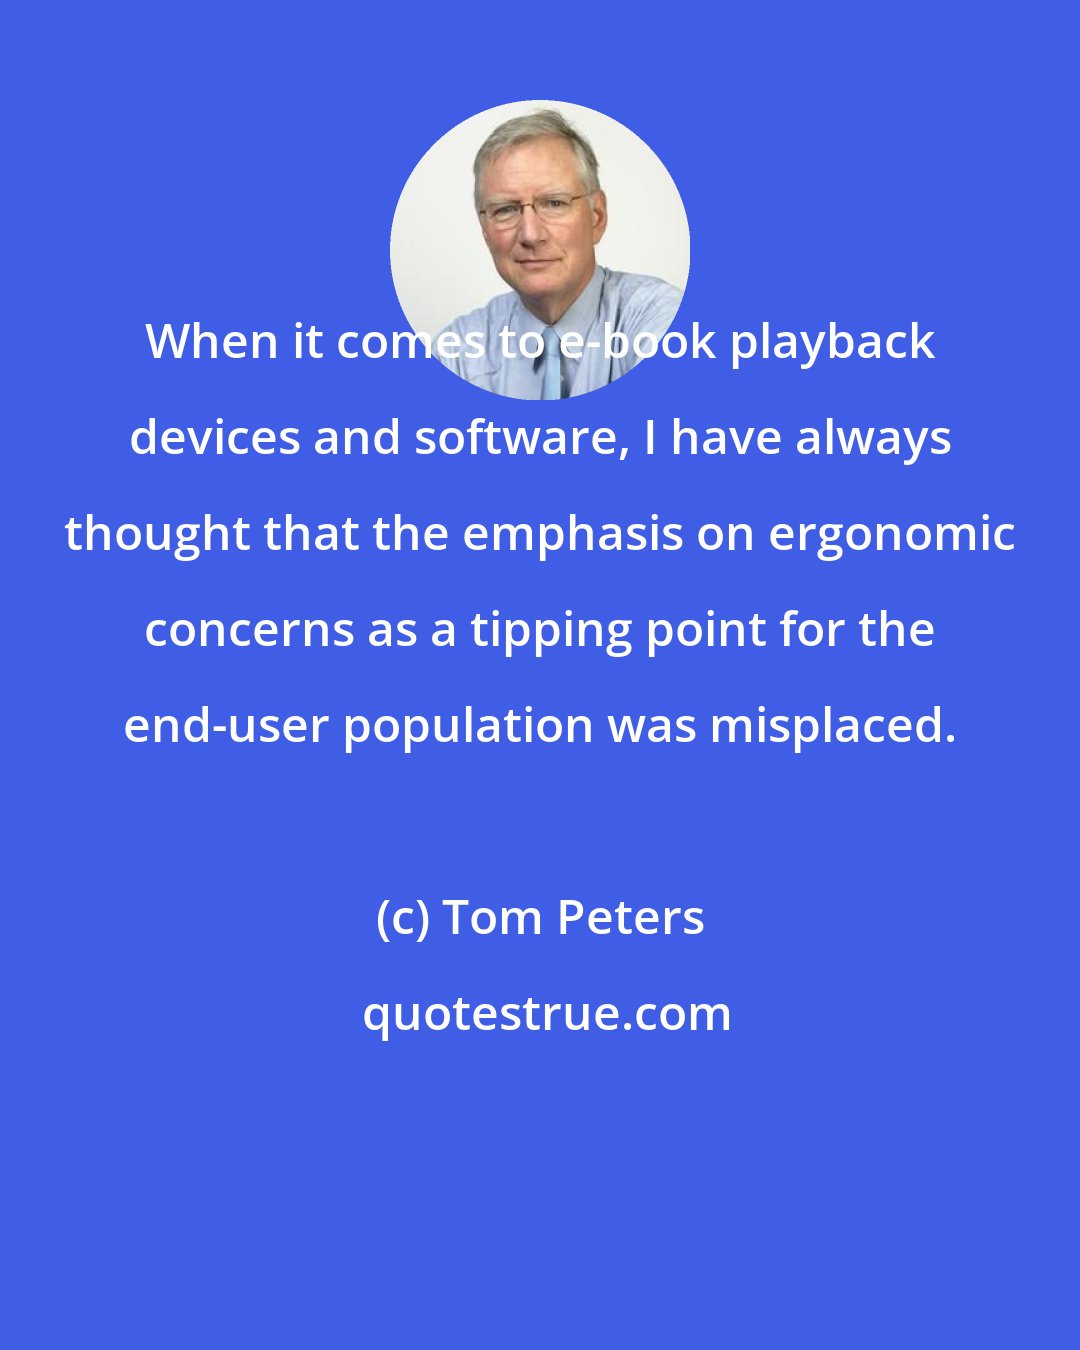 Tom Peters: When it comes to e-book playback devices and software, I have always thought that the emphasis on ergonomic concerns as a tipping point for the end-user population was misplaced.